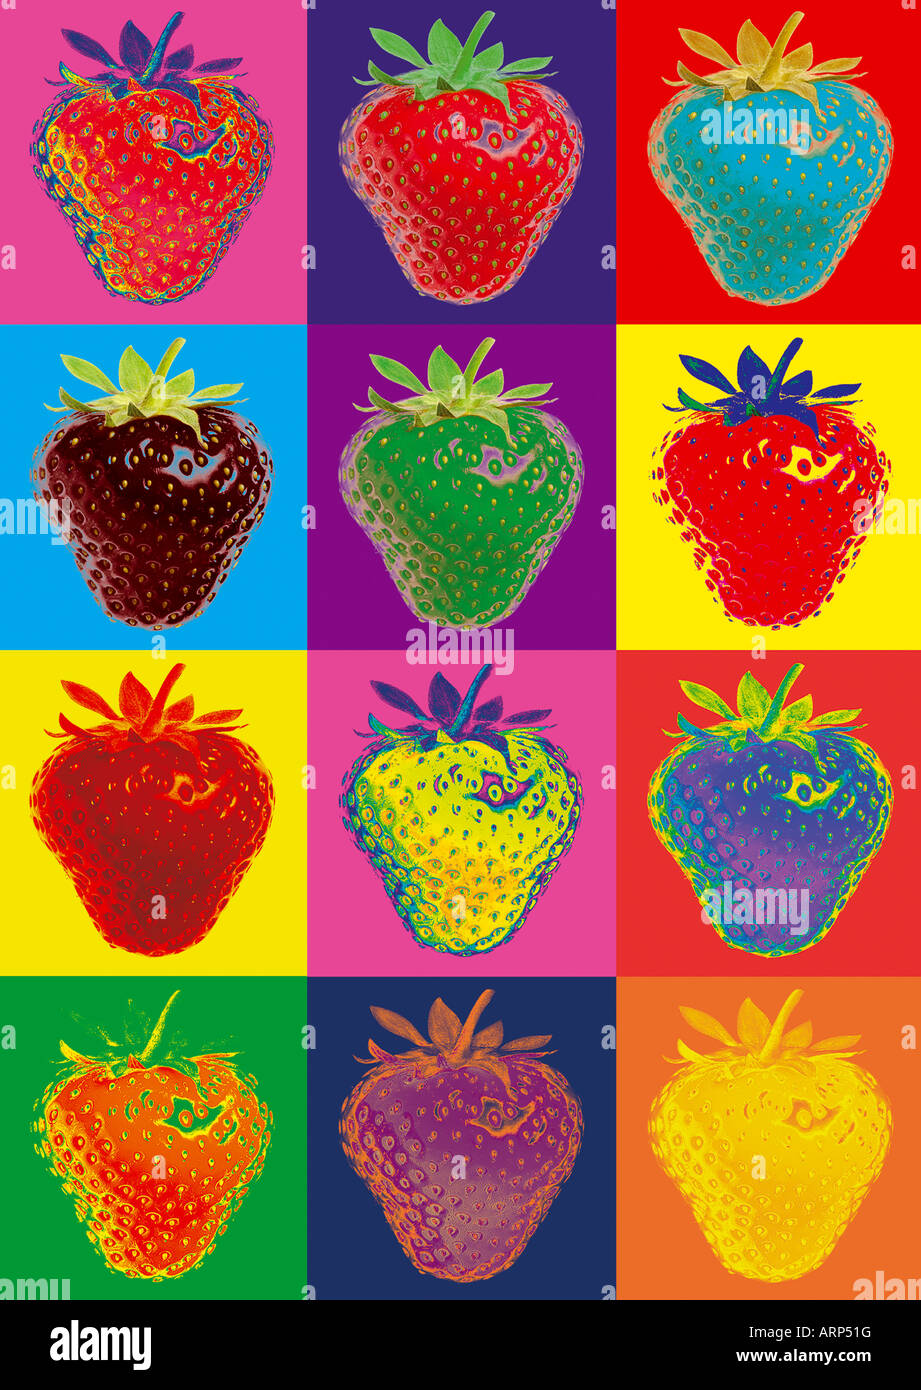 A strawberry photographed in the style of Andy Warhol. Stock Photo